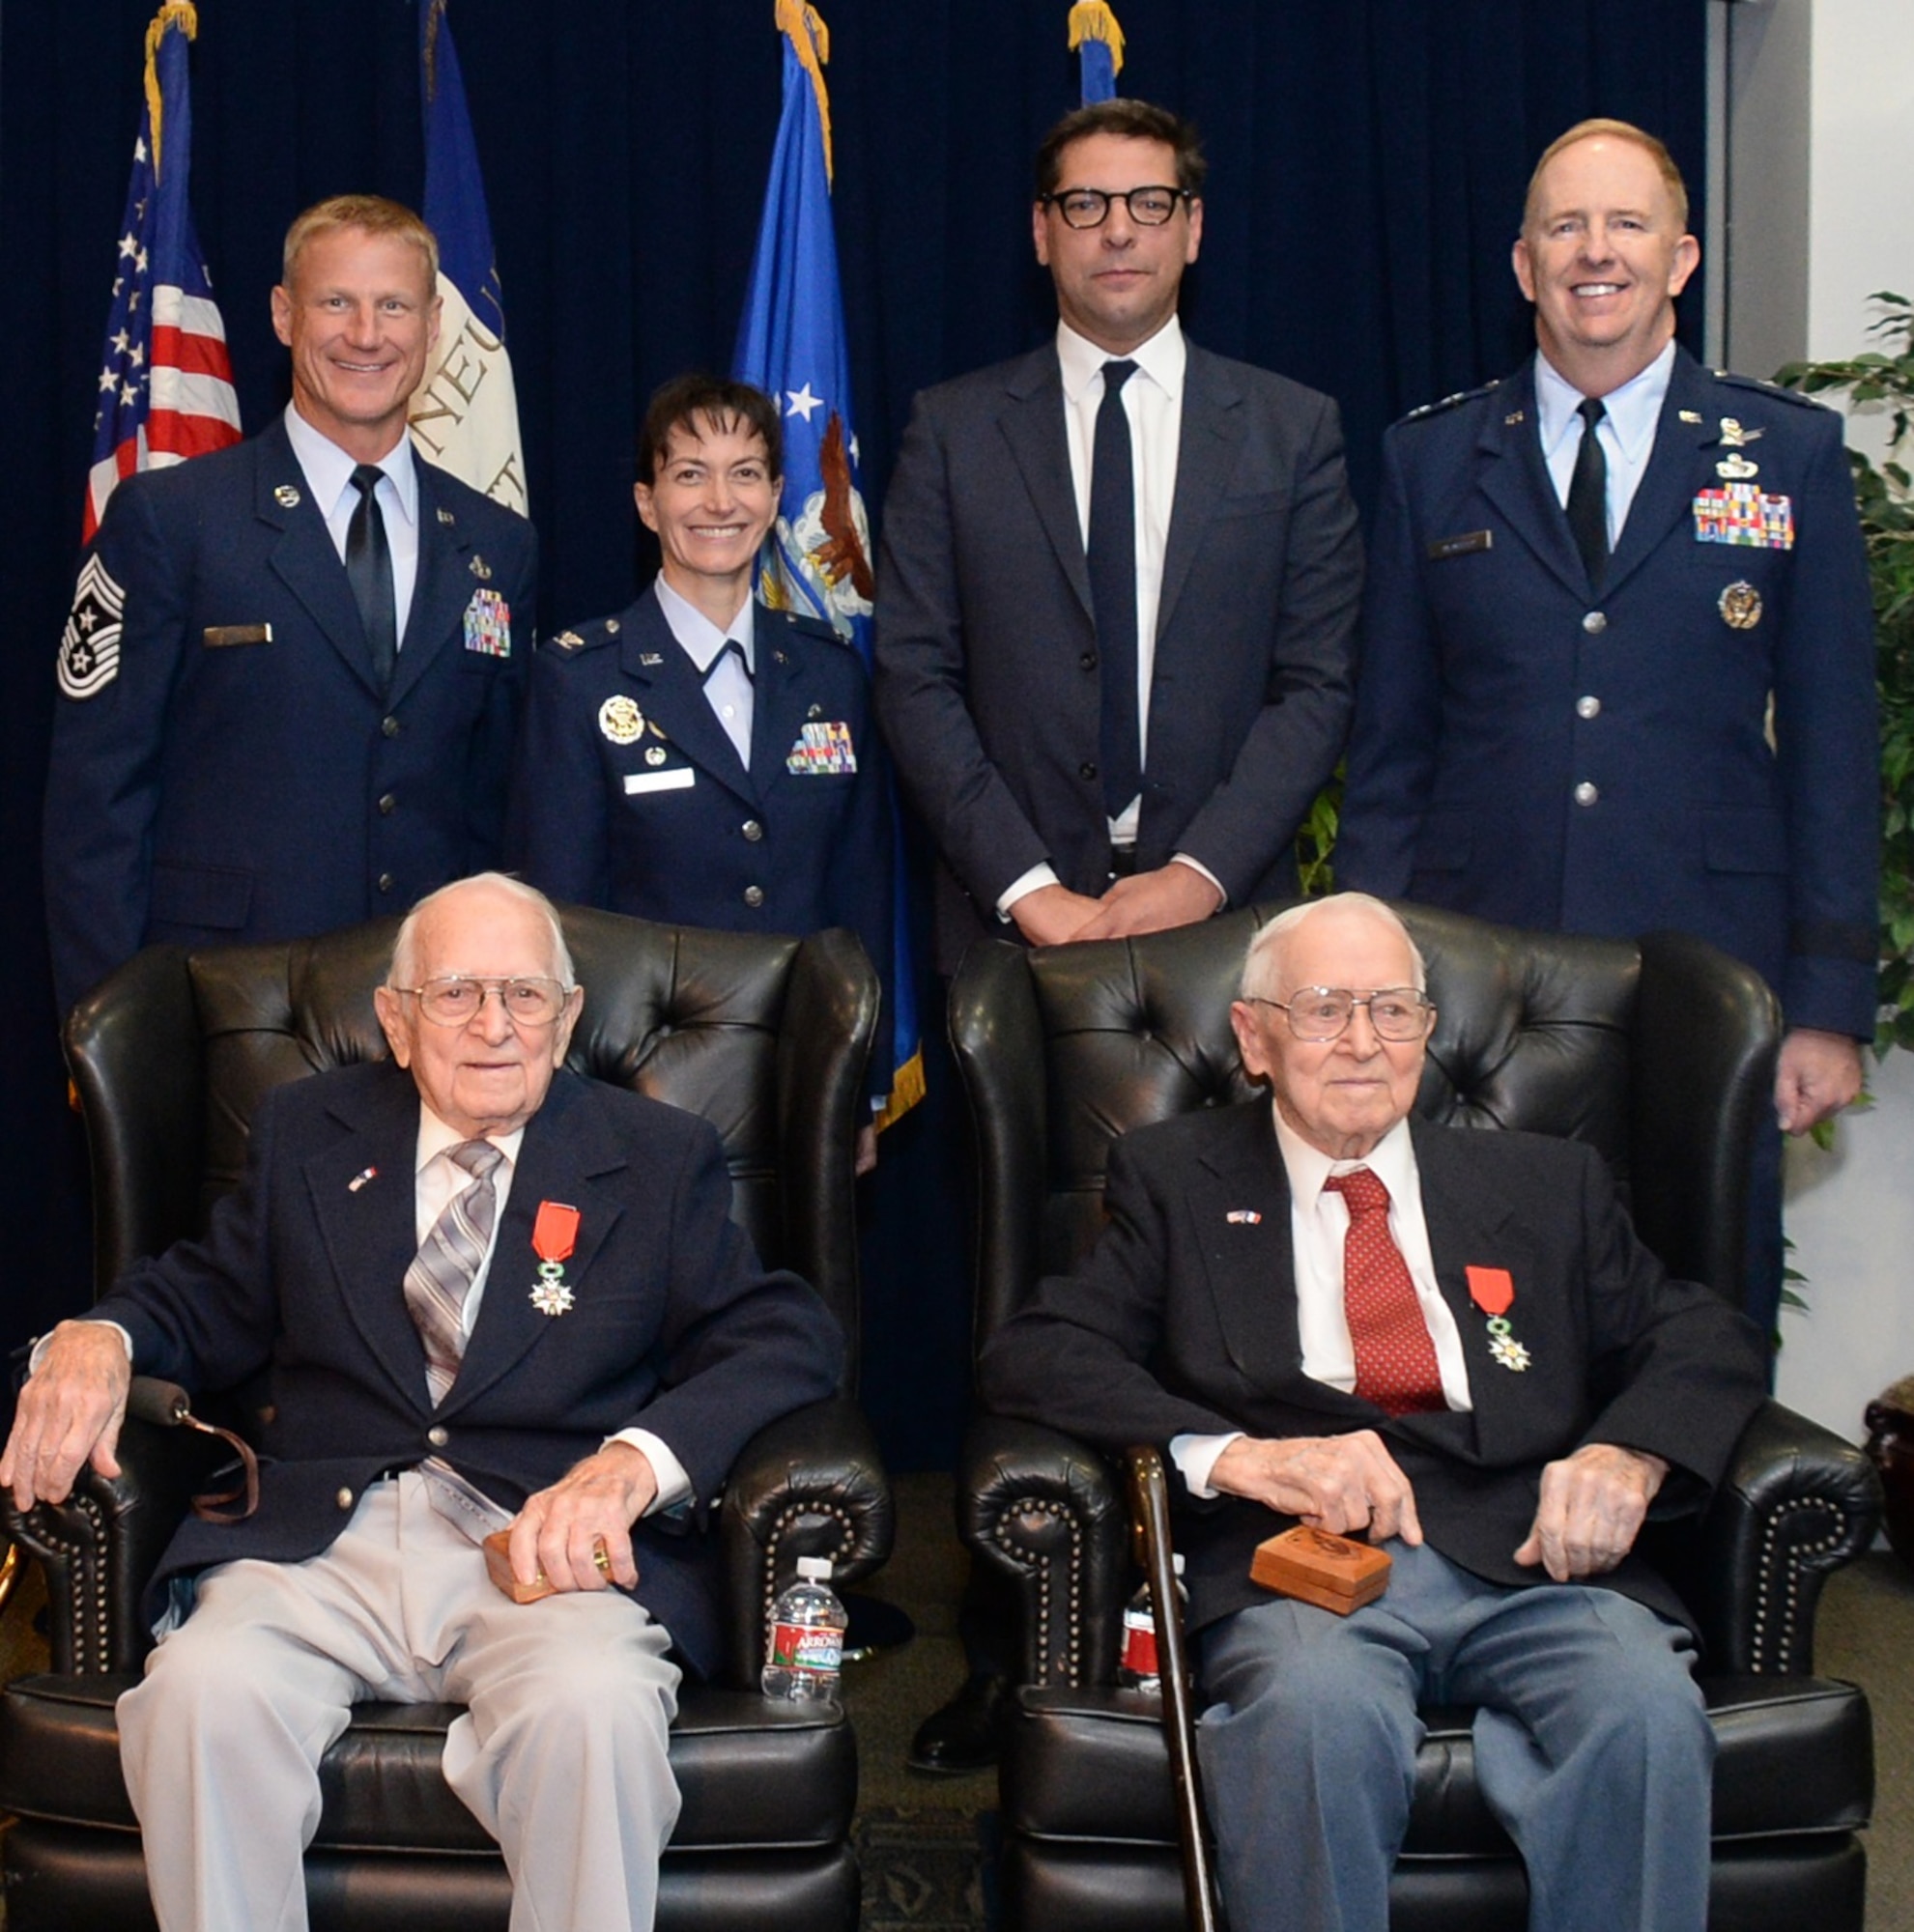 From left to right, Chief Master Sgt. Craig Hall, Space and Missile Systems Center command chief, Col. Donna Turner, 61st Air Base Group commander, Christophe Lemoine, French consul general in Los Angeles and Maj. Gen. Robert D. McMurry, Jr., SMC vice commander take a group photo with retired Air Force Reserve Majs. Russell “Lynn” Clanin and Raymond “Glenn” Clanin in the Gordon Conference Center at the Schriever Space Complex of the Space and Missile Systems Center at Los Angeles Air Force Base in El Segundo, Calif., Dec. 2. The 92-year-old twin brothers are the latest recipients of the French government's highest distinction for their military service as World War II veterans, the Legion of Honor medal. (U.S. Air Force photo/Van De Ha)